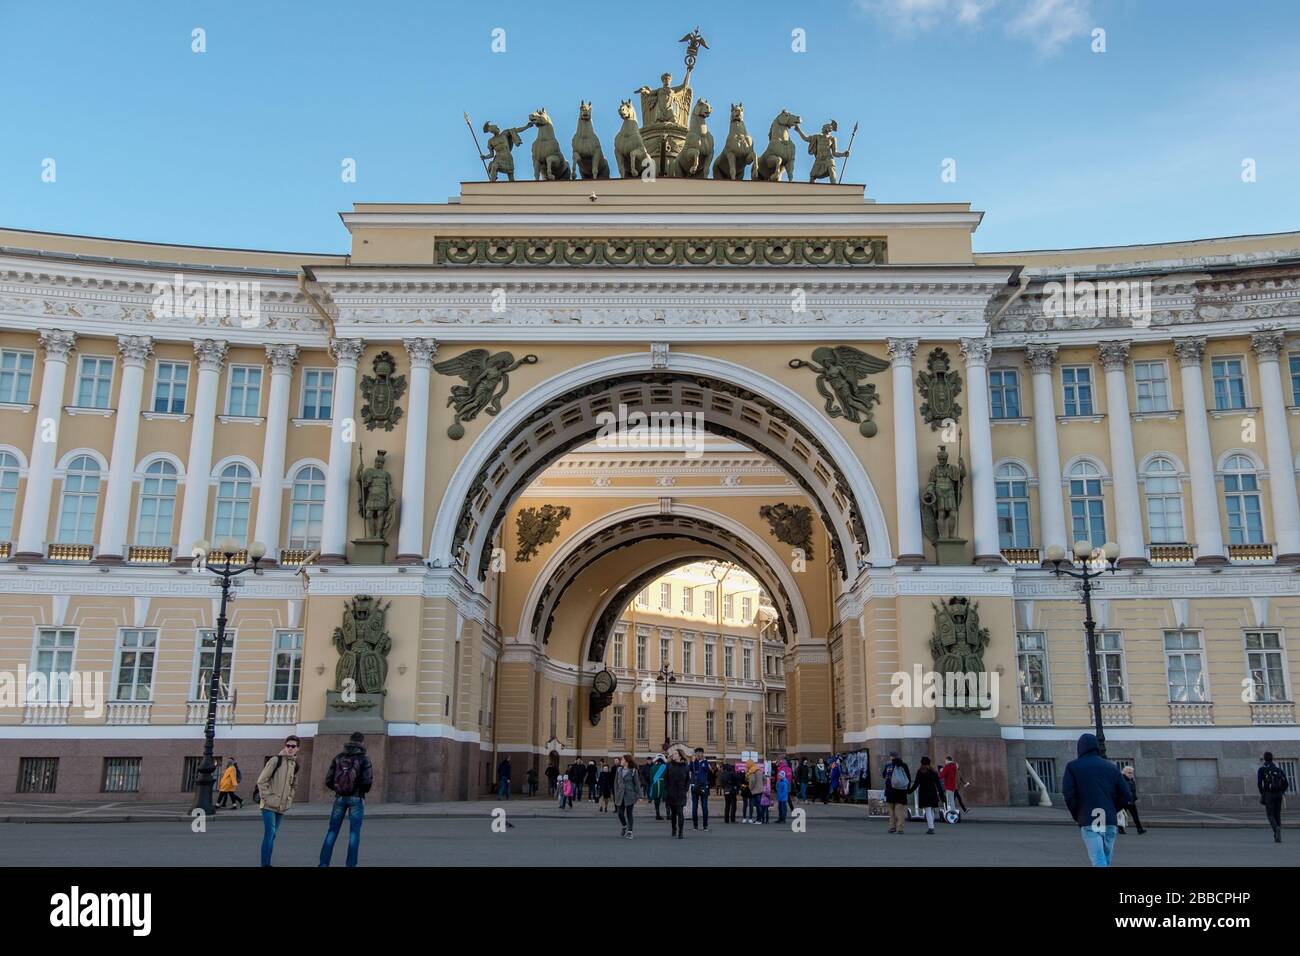 The arch of the General Staff Building, Palace Square, St. Petersburg, Russia Stock Photo